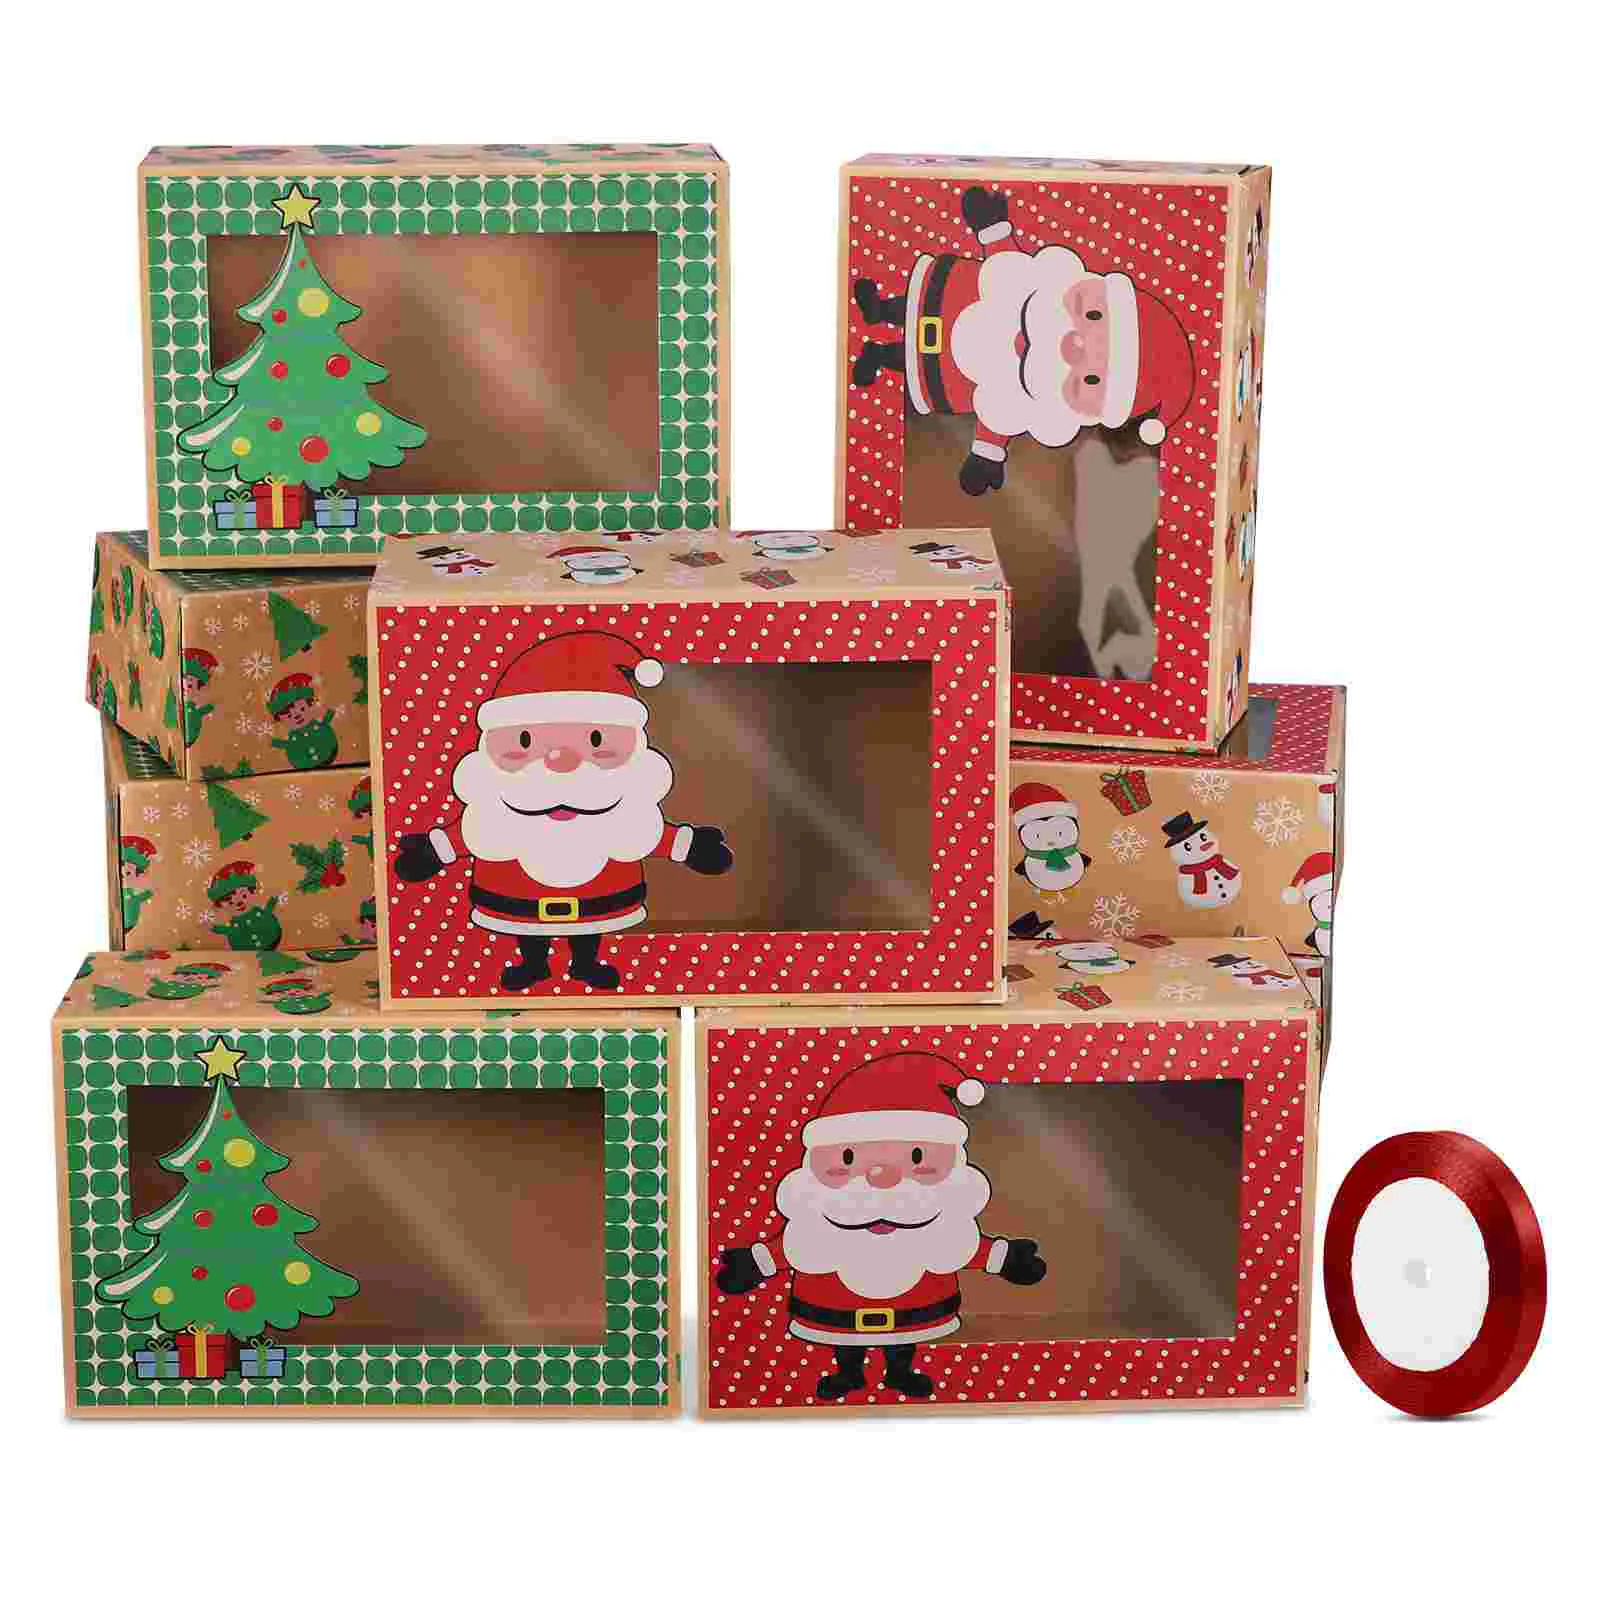 

Boxes Christmas Gift Box Cupcake Bakery Packaging Tins Treatcontainer Papergoodie Smallcandy Containers Wrapping Holiday Cookie